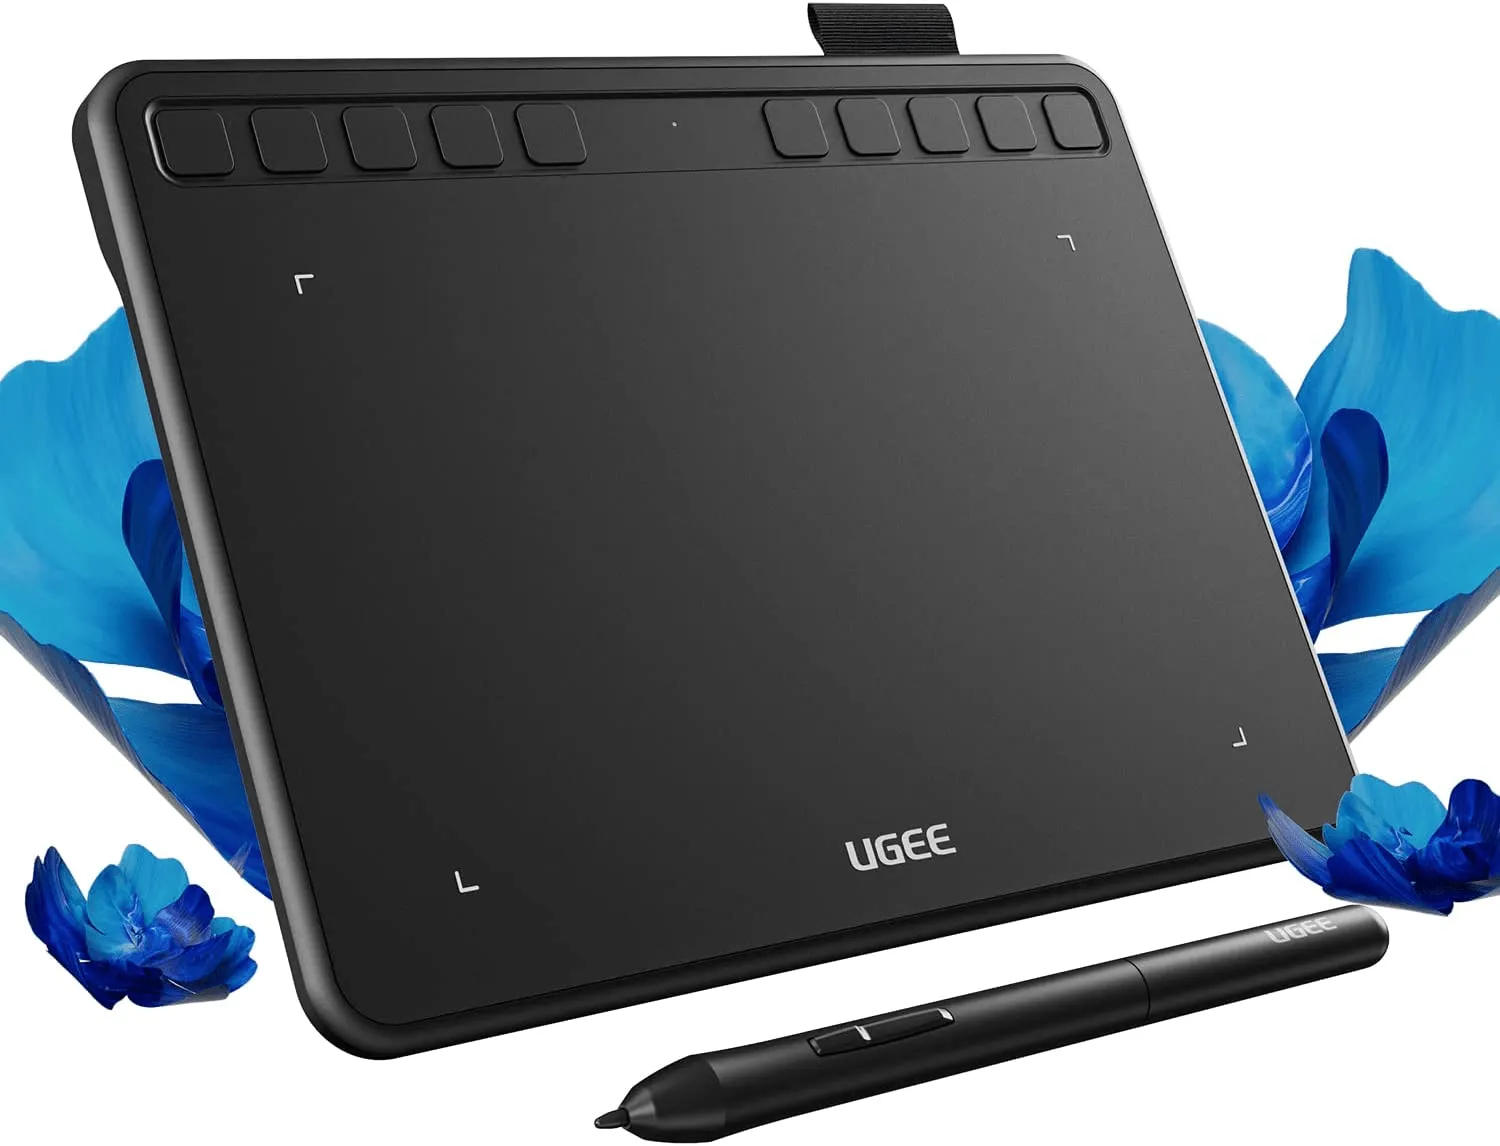 Drawing Tablet, Portable Graphics Tablet